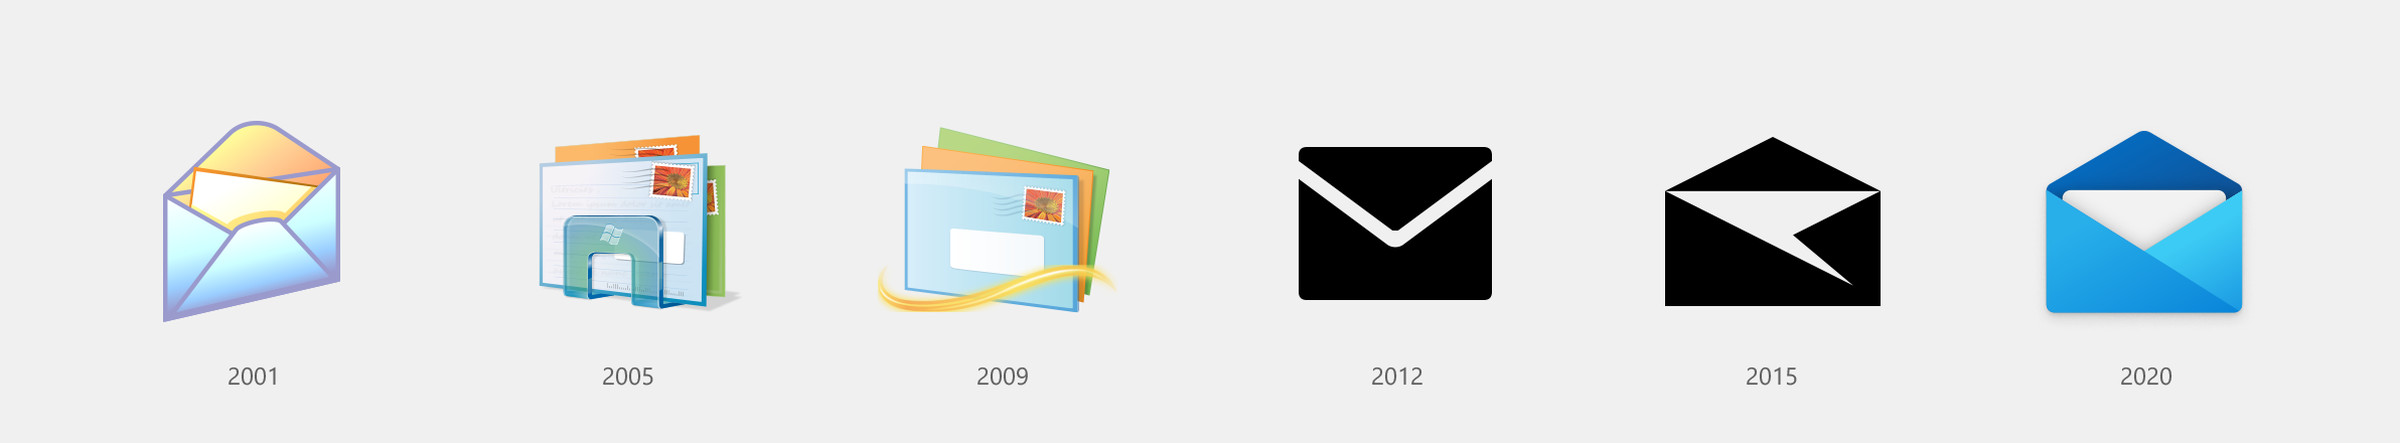 How the Windows Mail icon has changed over the years.